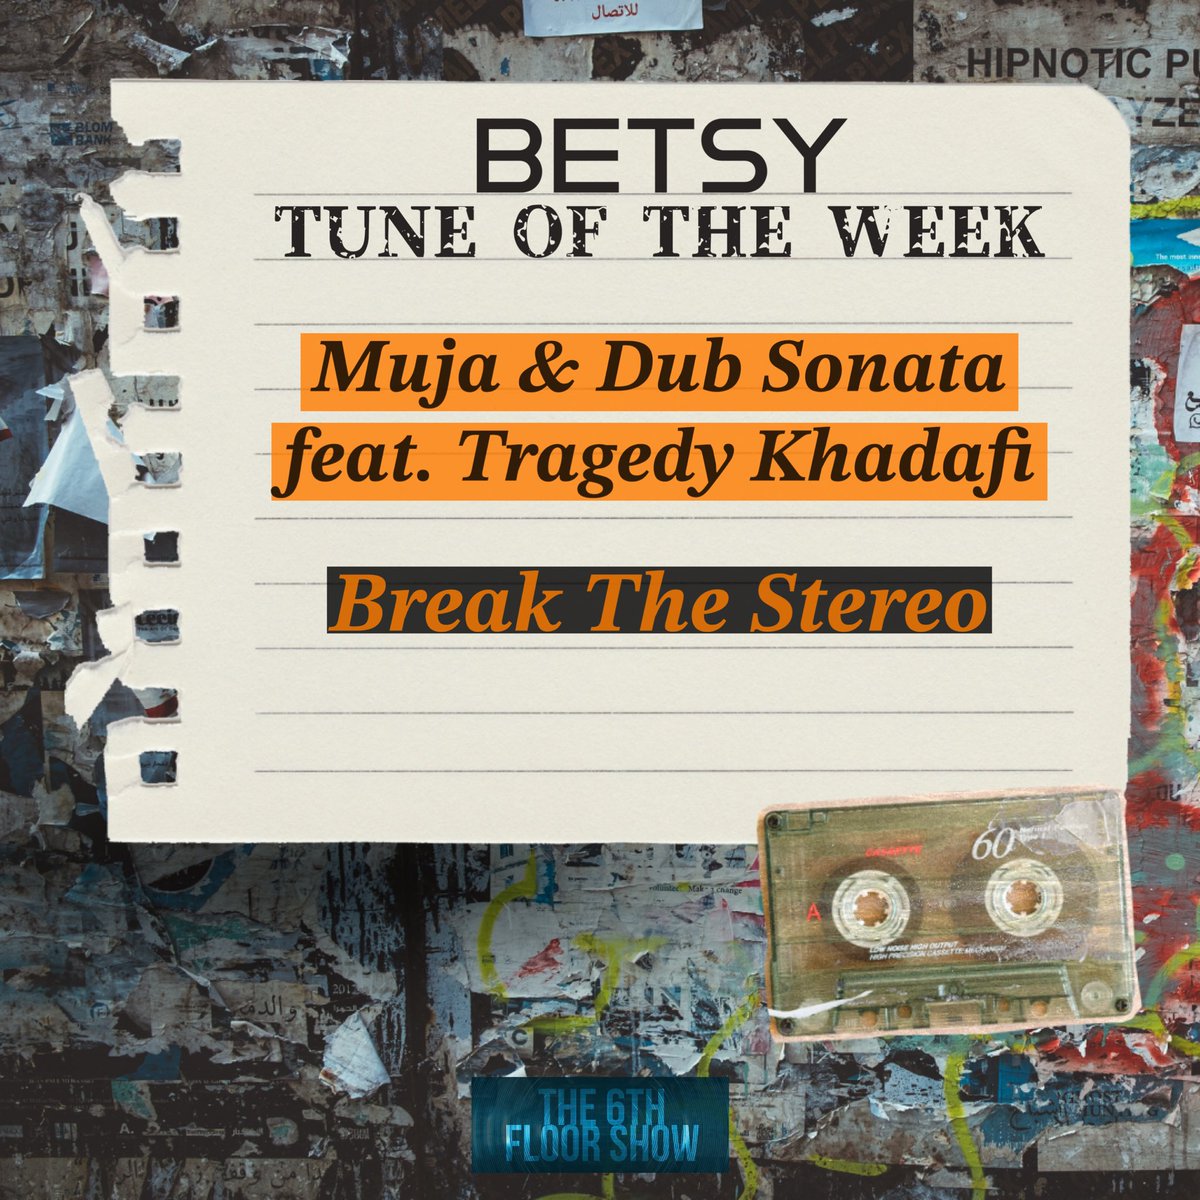 The Betsy #TuneOfTheWeek pick is… Muja & @DubSonata feat. @252aura - #BreakTheStereo 🎶 open.spotify.com/track/3H6dNq9b… #The6thFloorShow